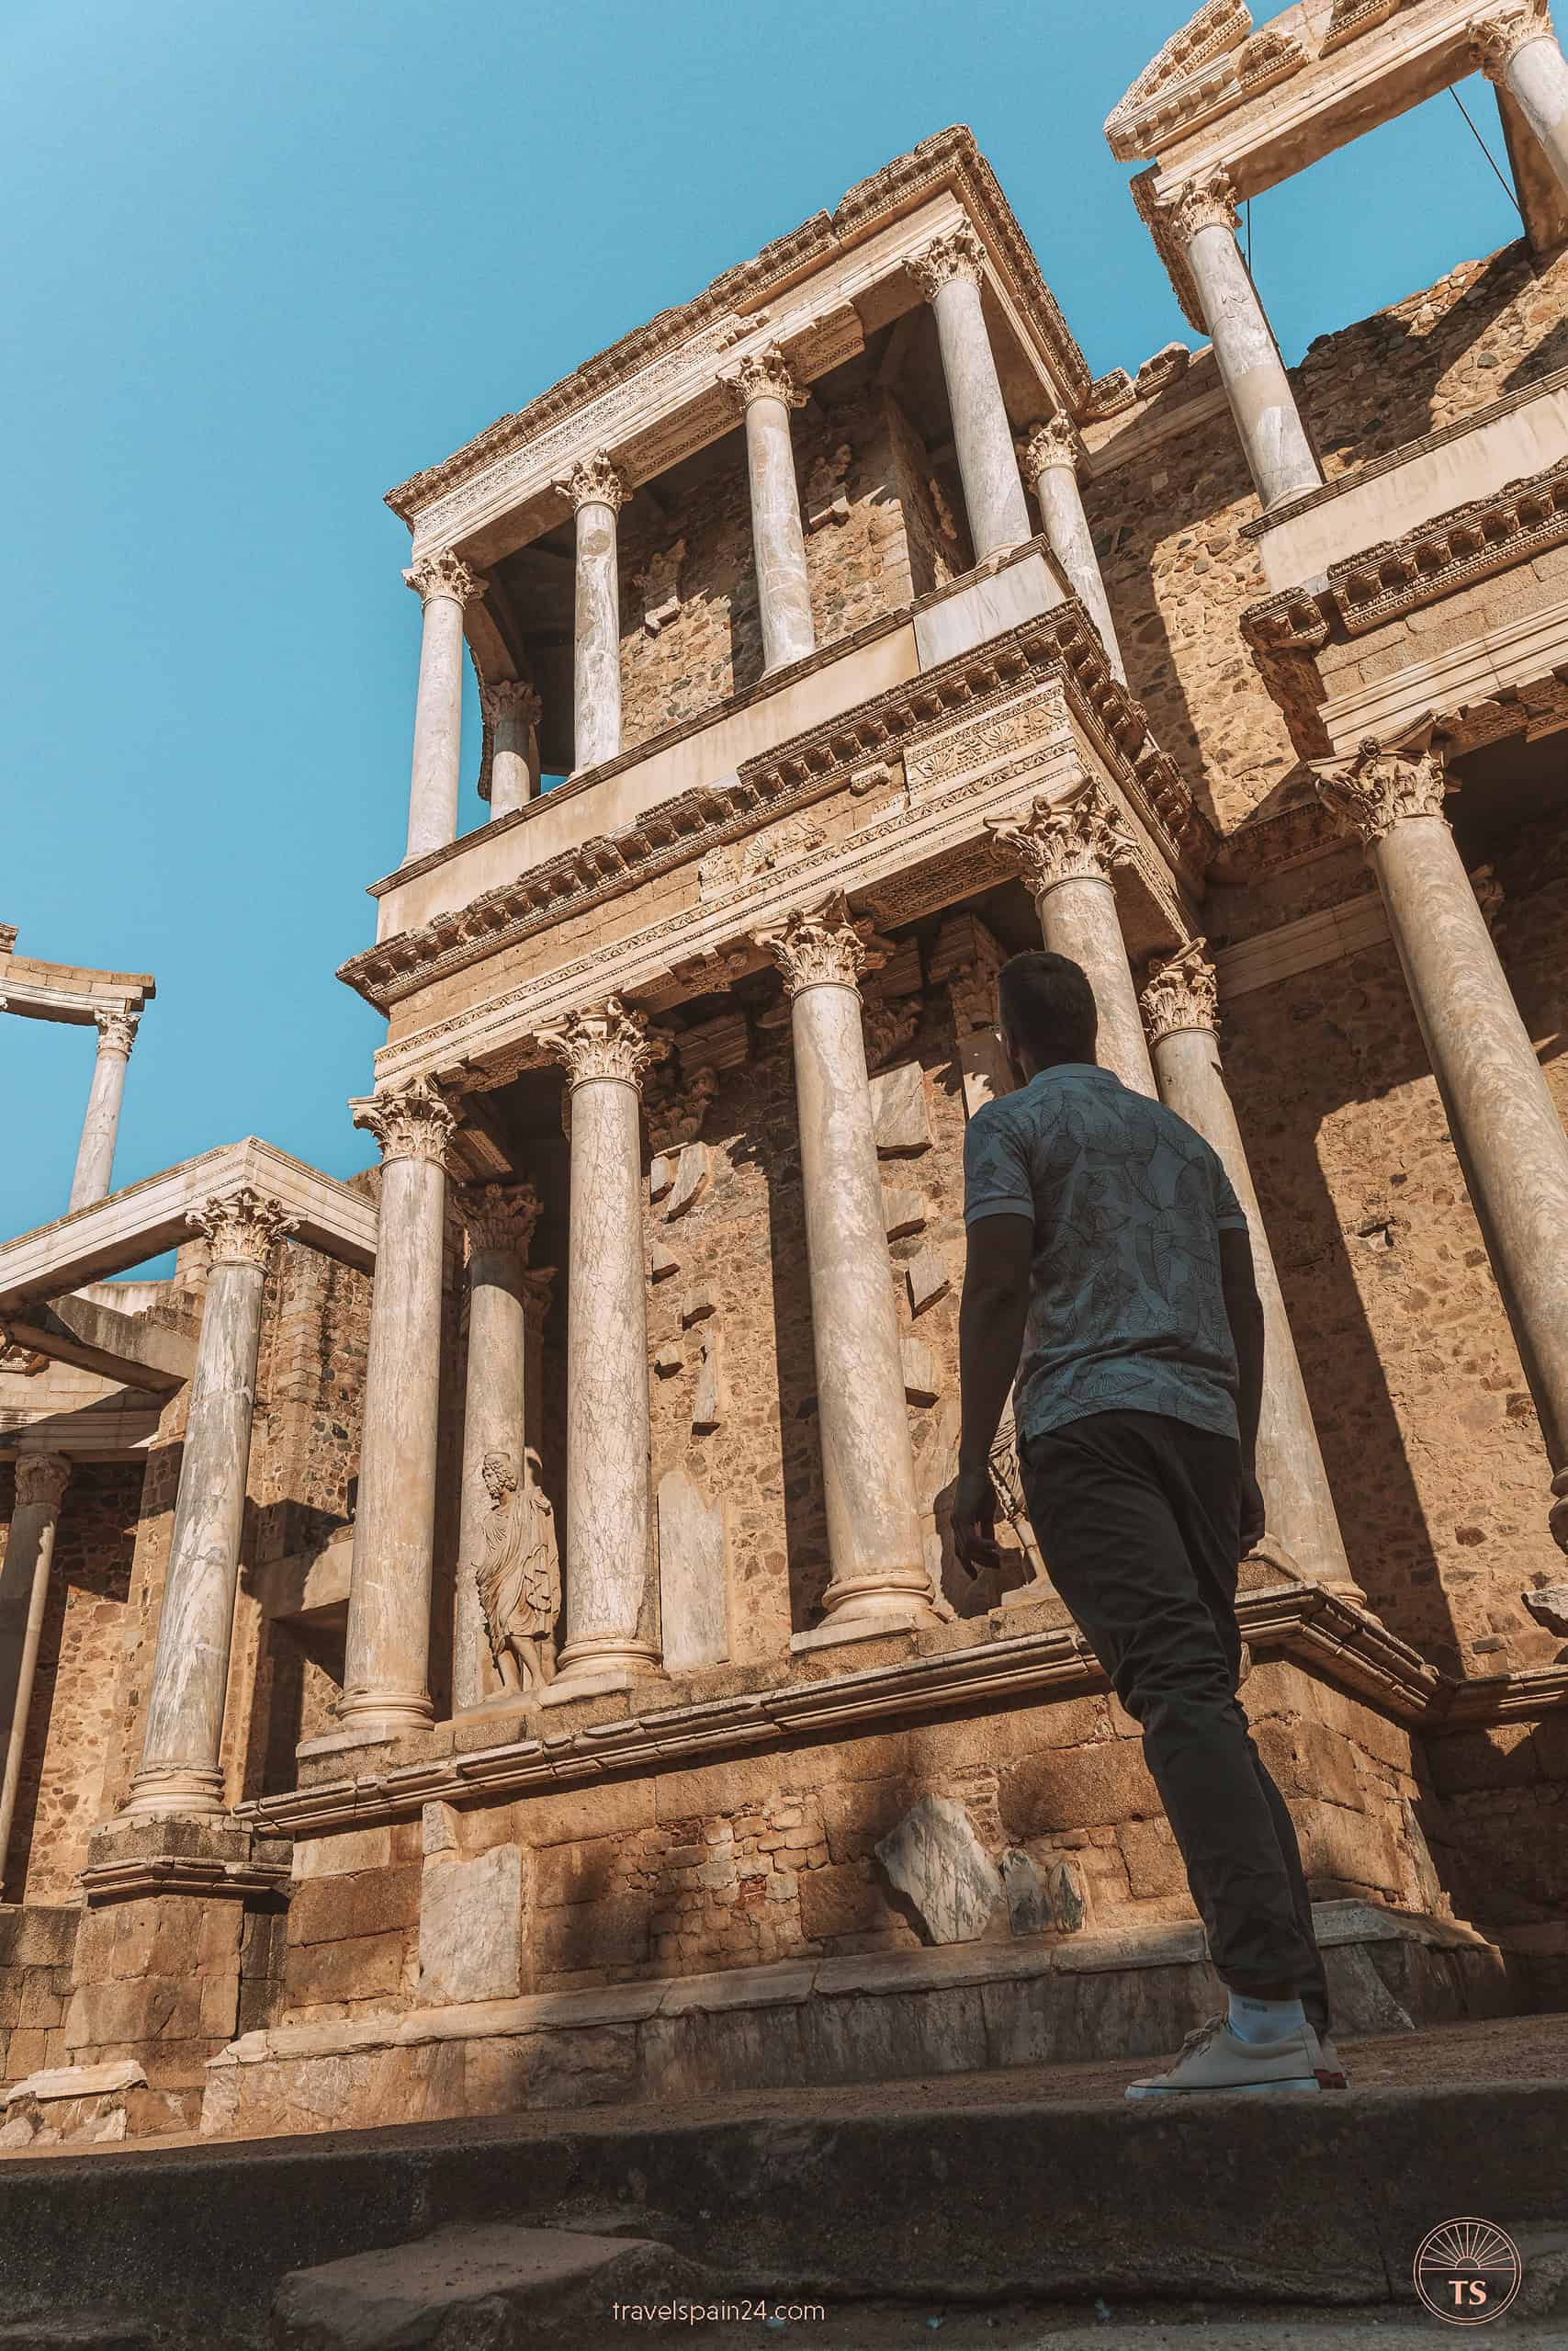 Timon van Basten admiring the Roman Theatre in Mérida, with sunlight highlighting the ancient pillars against a clear blue sky.